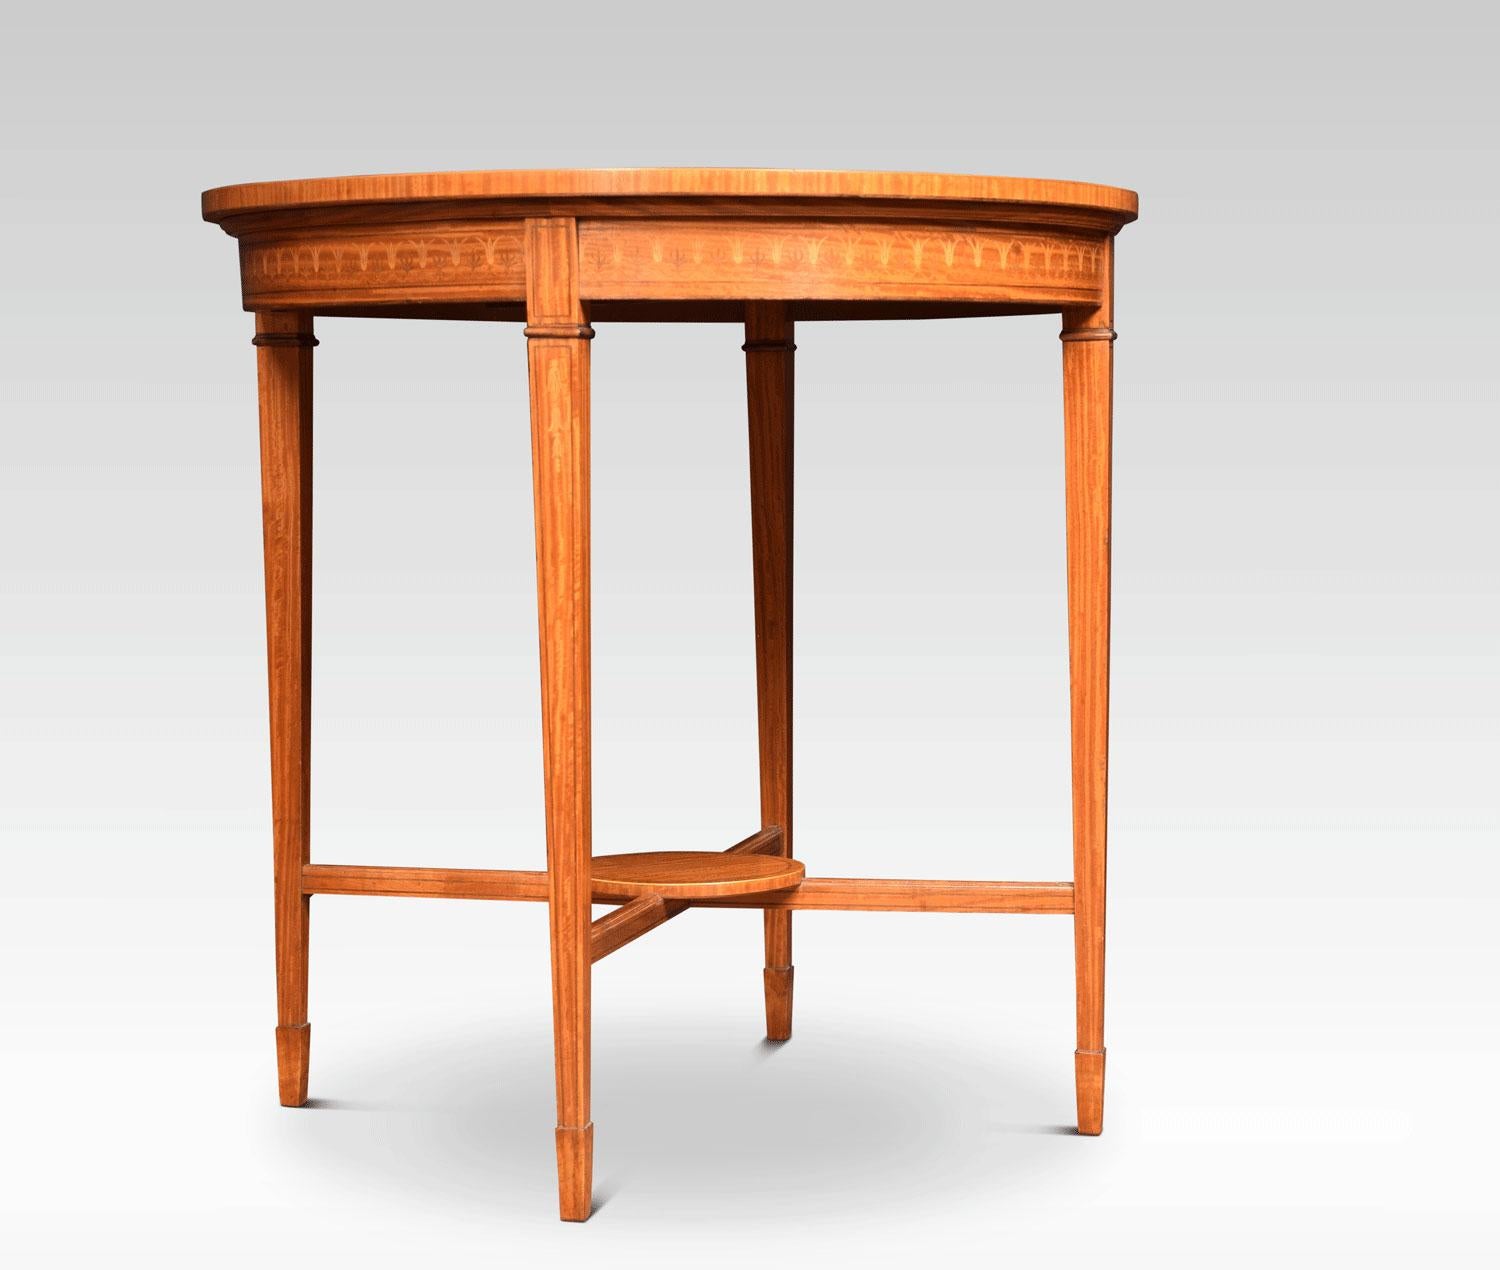 Edwardian satinwood inlaid centre table, the circular cross banded top centered by a boxwood and hardwood flower head motif, within a harebell swag garland. All raised up raised up on four square tapering legs terminating in spade feet. United by